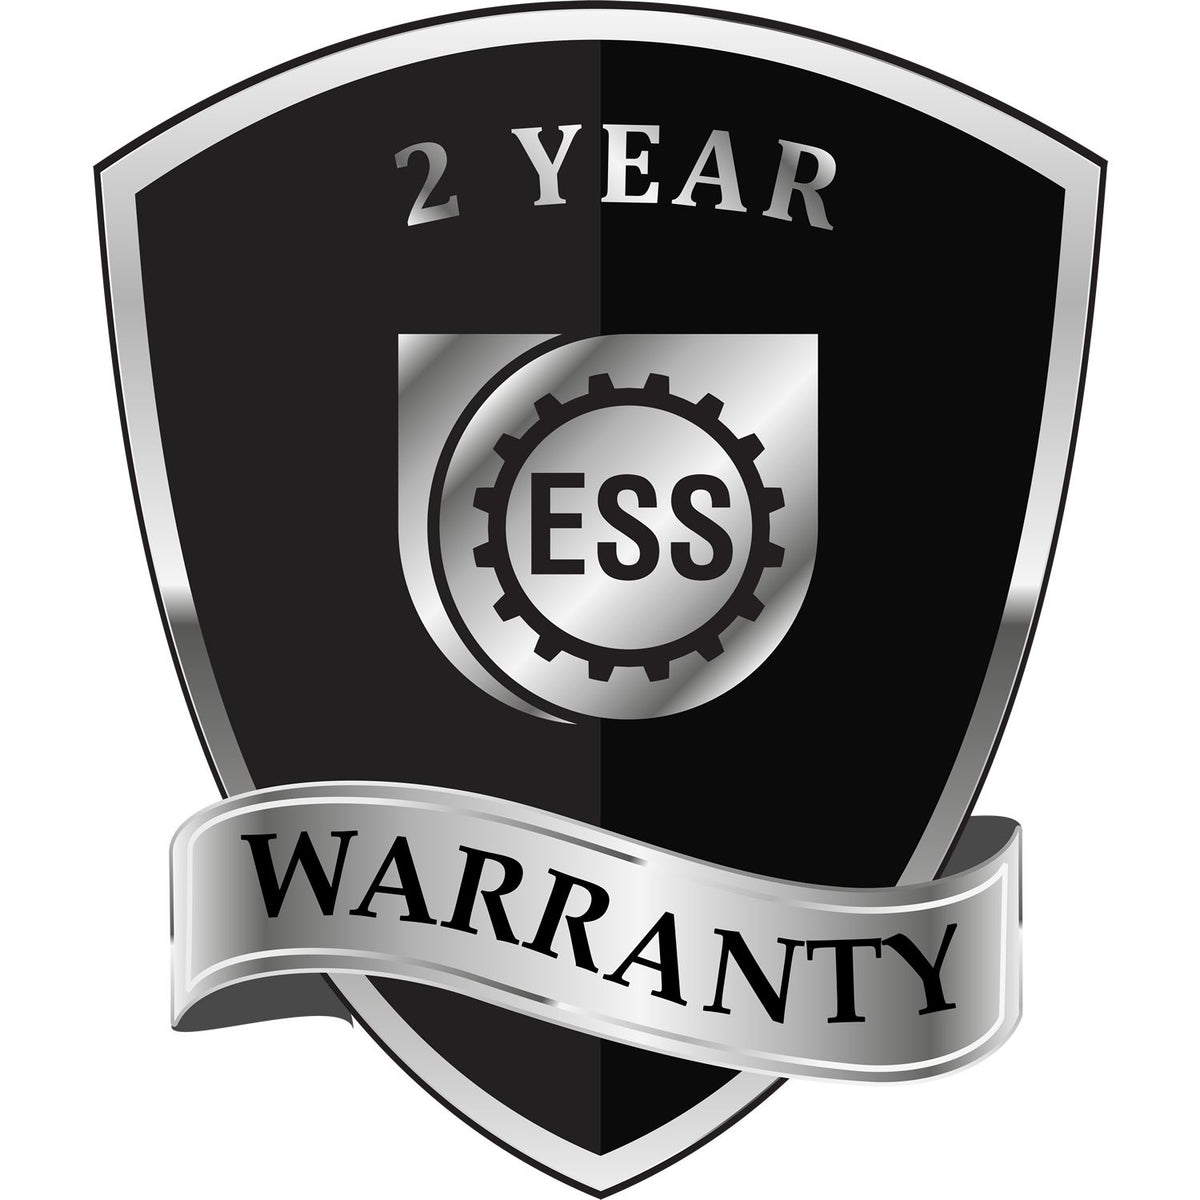 A black and silver badge or emblem showing warranty information for the Hybrid California Engineer Seal